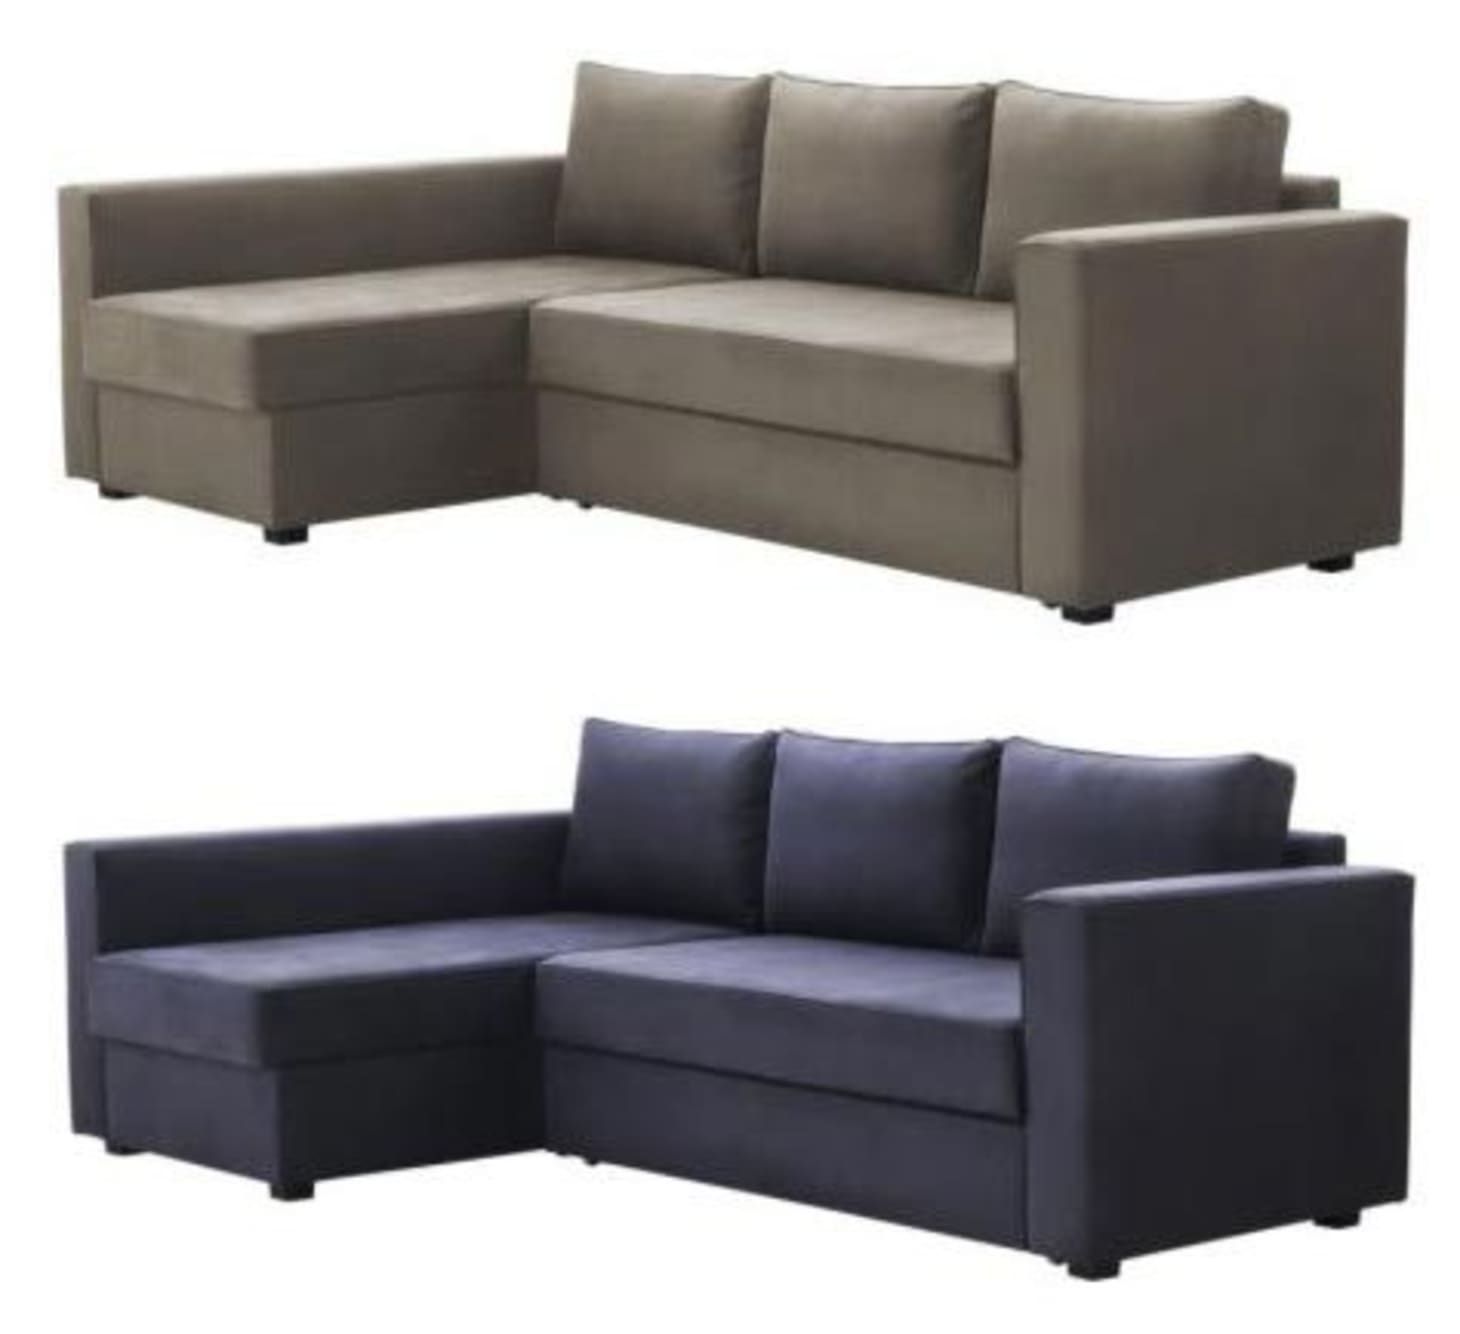 Manstad Sectional Sofa Bed & Storage From Ikea | Apartment In Celine Sectional Futon Sofas With Storage Reclining Couch (View 8 of 15)